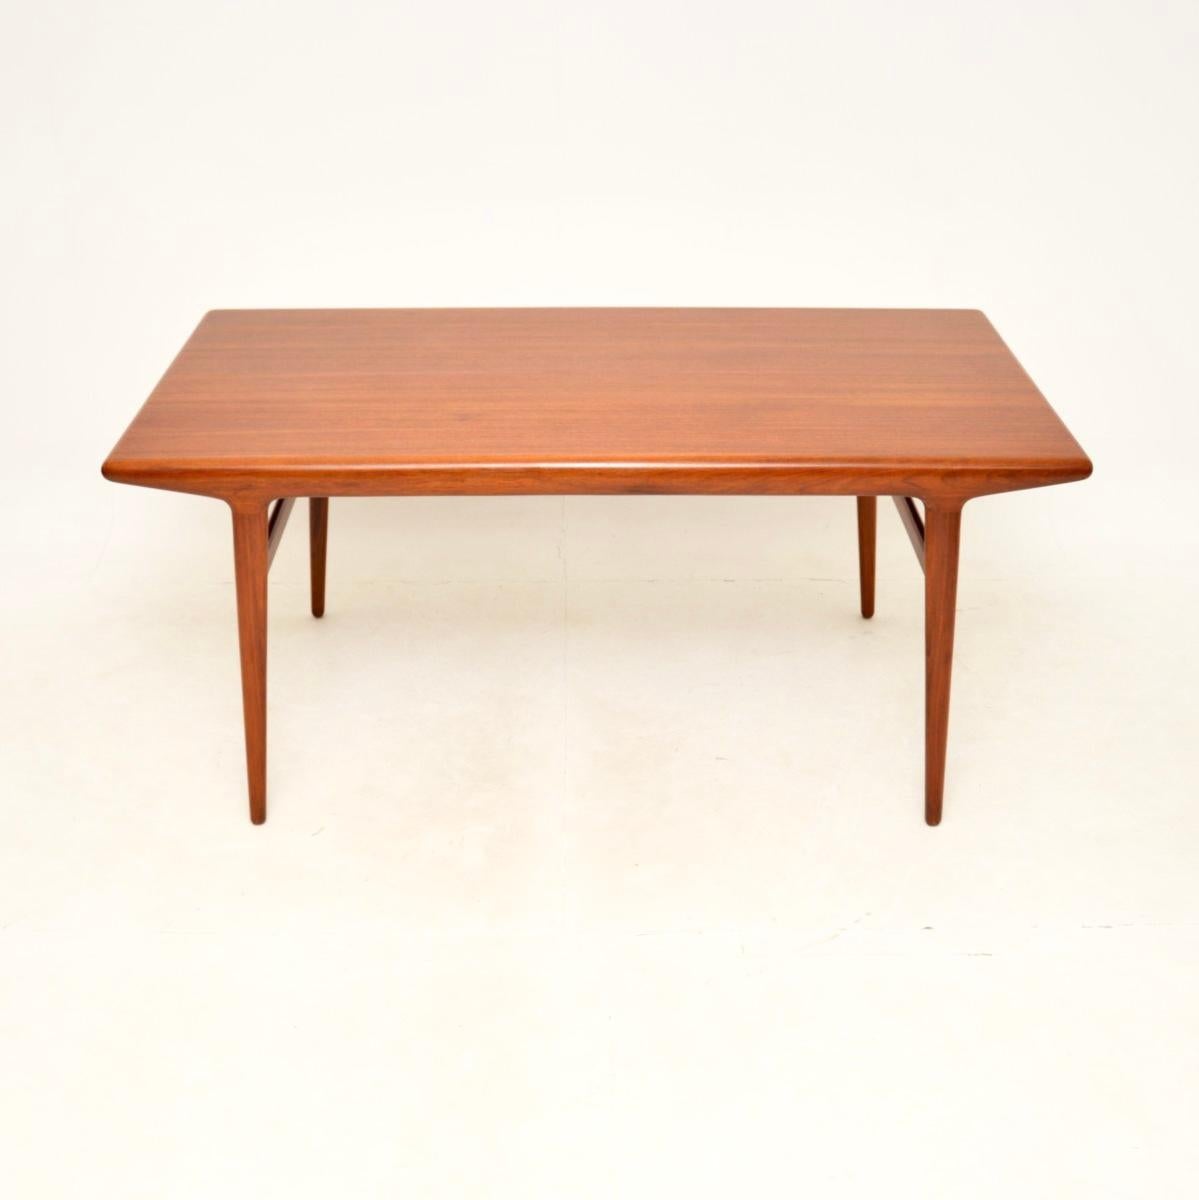 A stylish and extremely well made vintage Danish teak dining table / desk by Niels Moller. This was made in Denmark by JLM Mobelfabrik, it dates from the 1960’s.

The quality is outstanding, this is beautifully designed and looks amazing from all